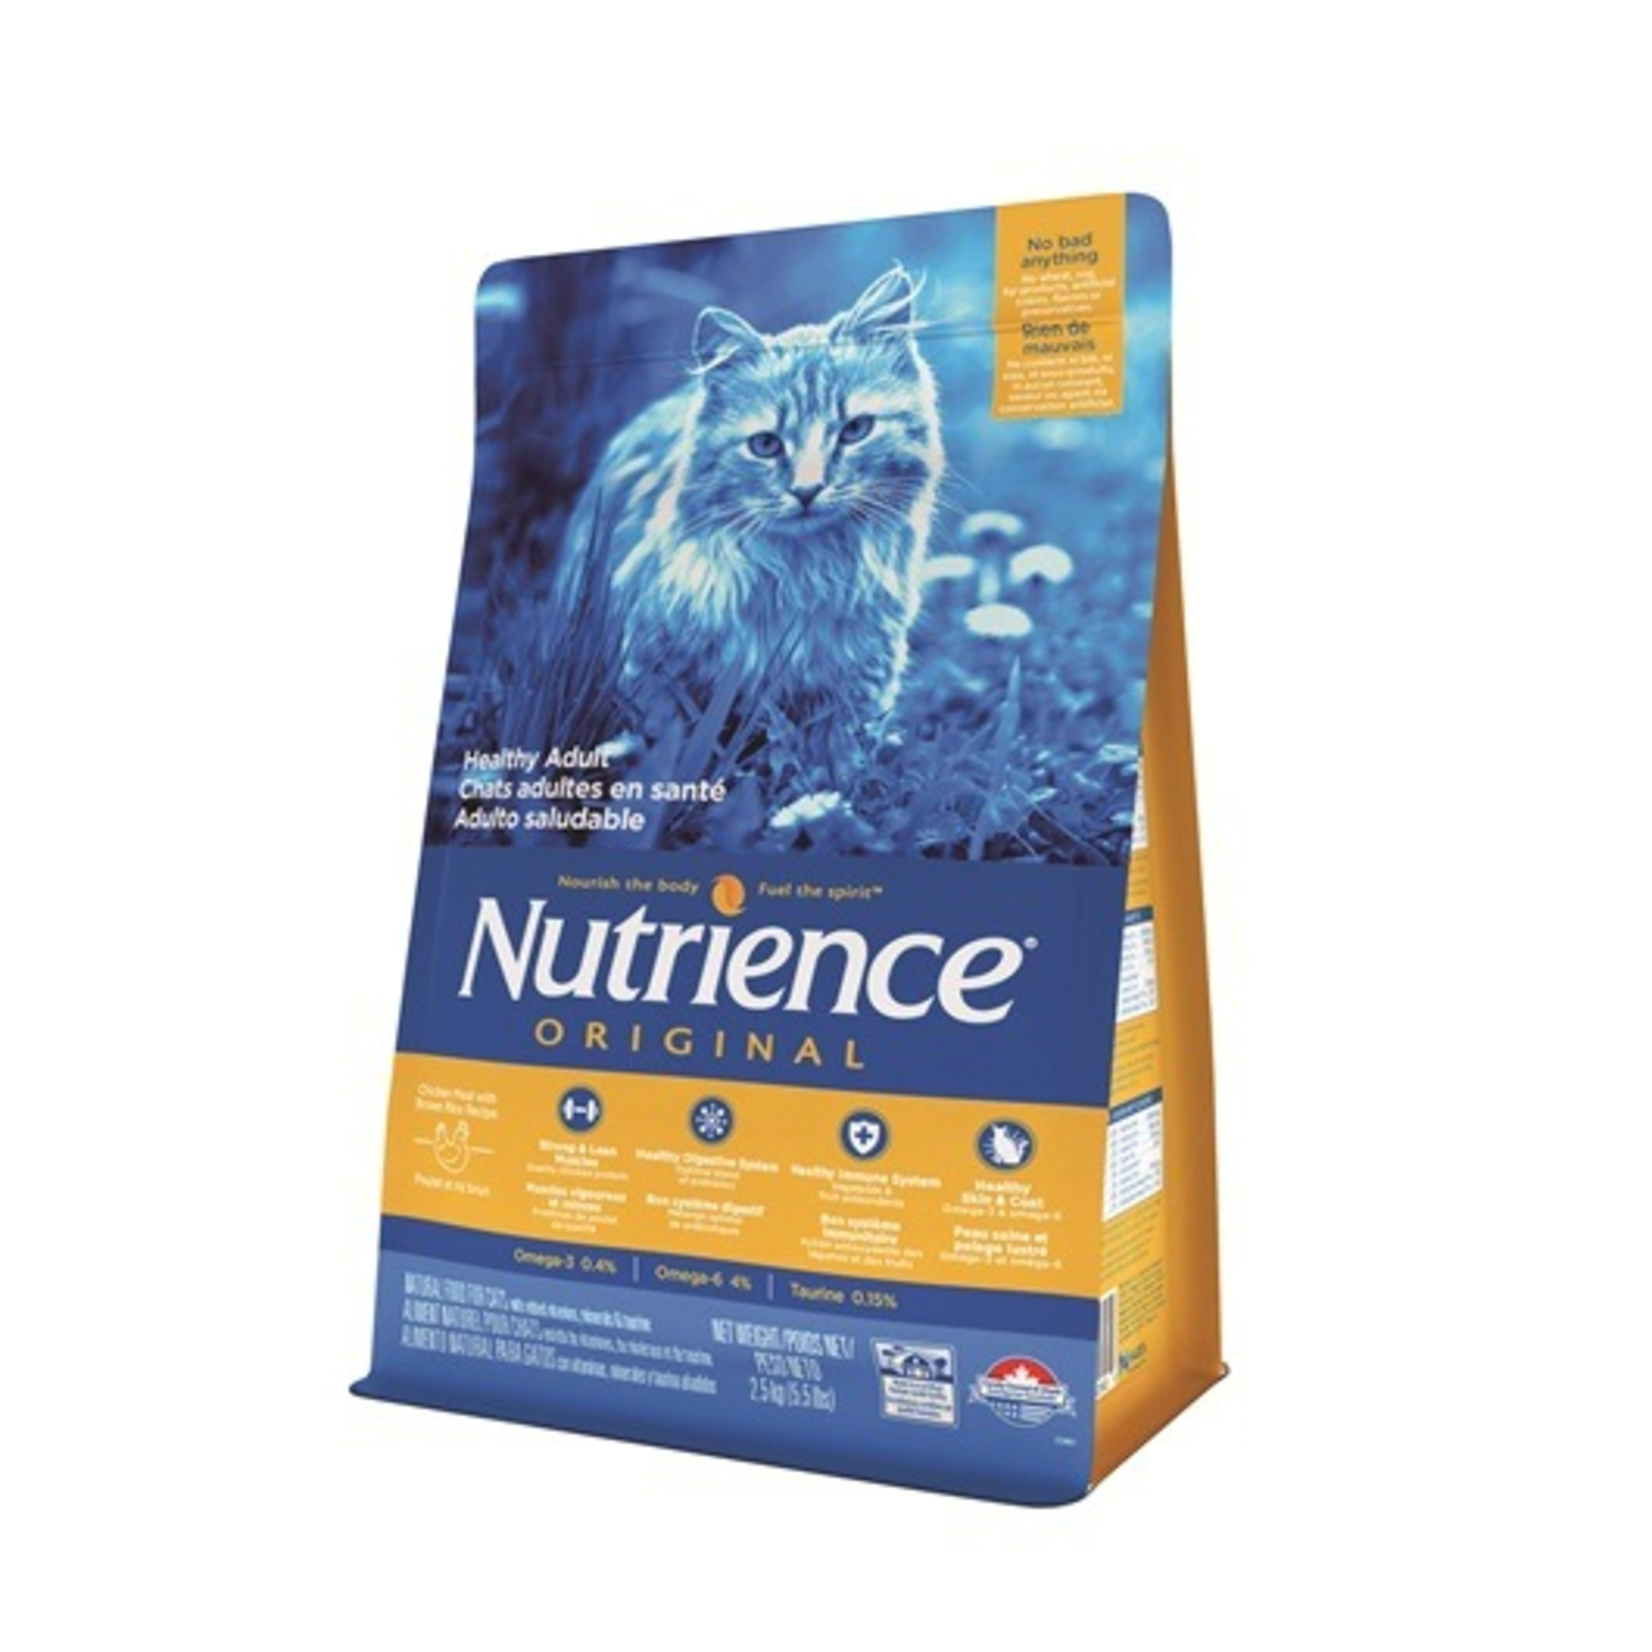 NUTRIENCE Nutrience Original Adult for Cats - 2.5kg